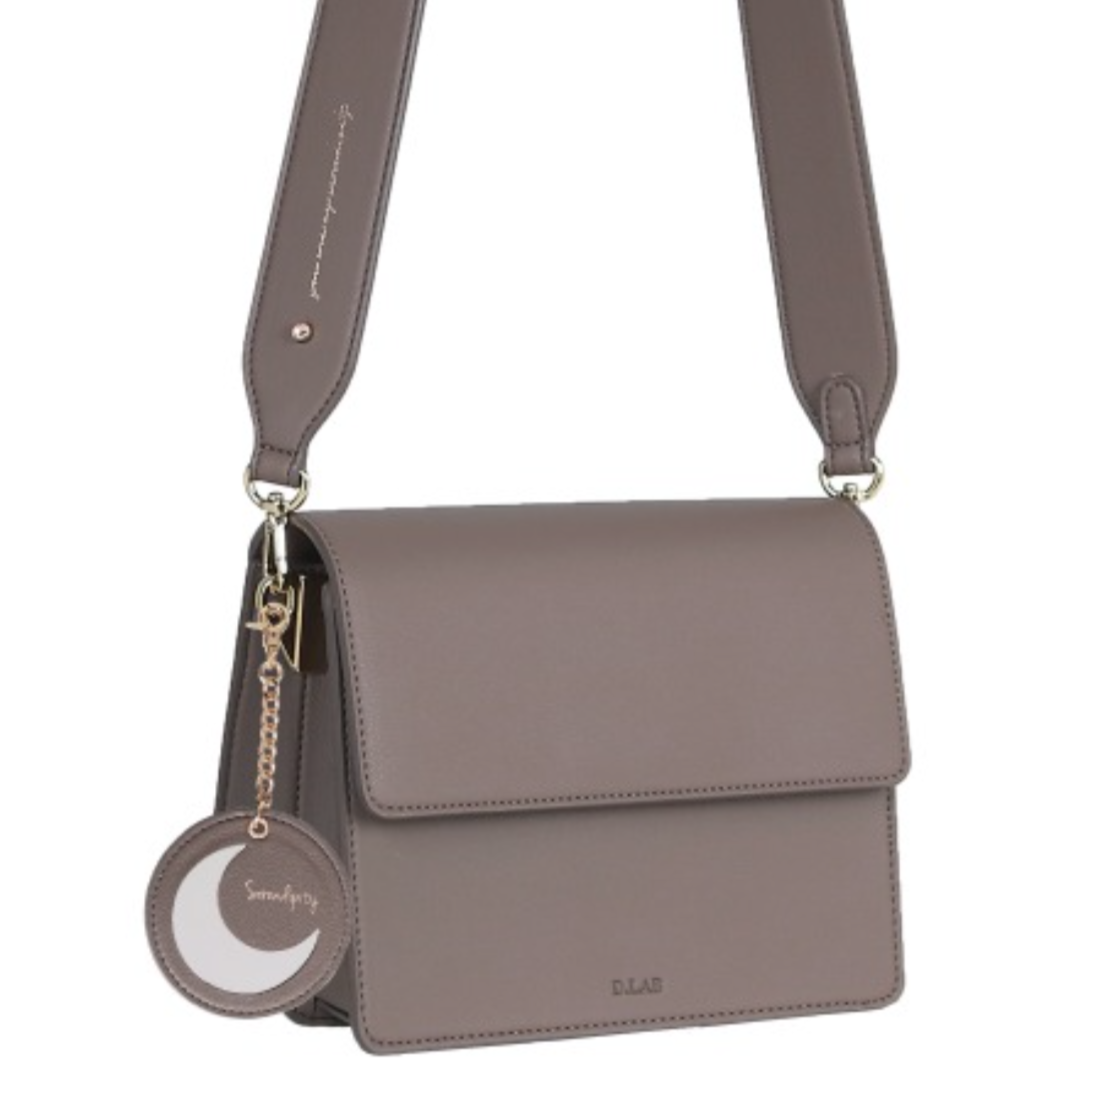 D.LAB May Bag Taupe – NOTAG GLOBAL